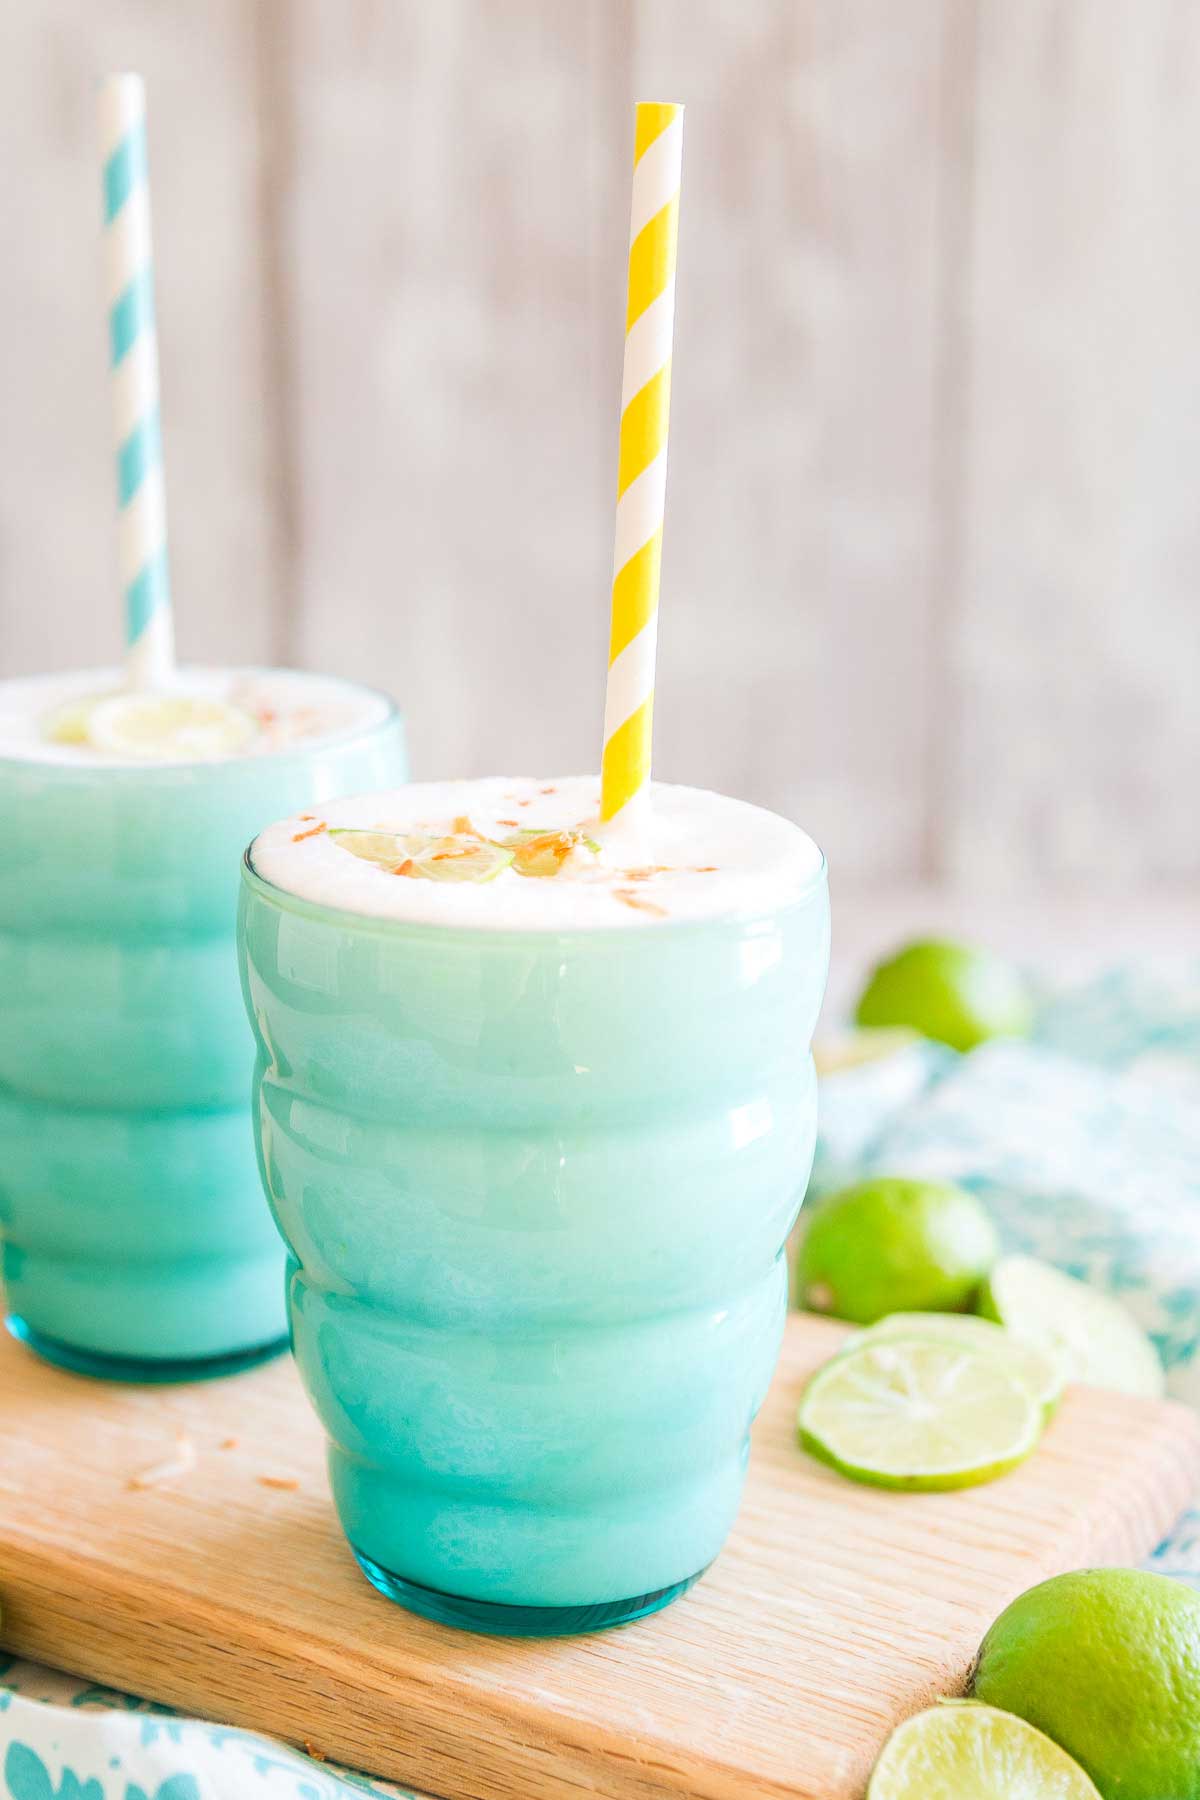 Dairy free and easily made vegan, this key lime smoothie can be enjoyed by everyone.